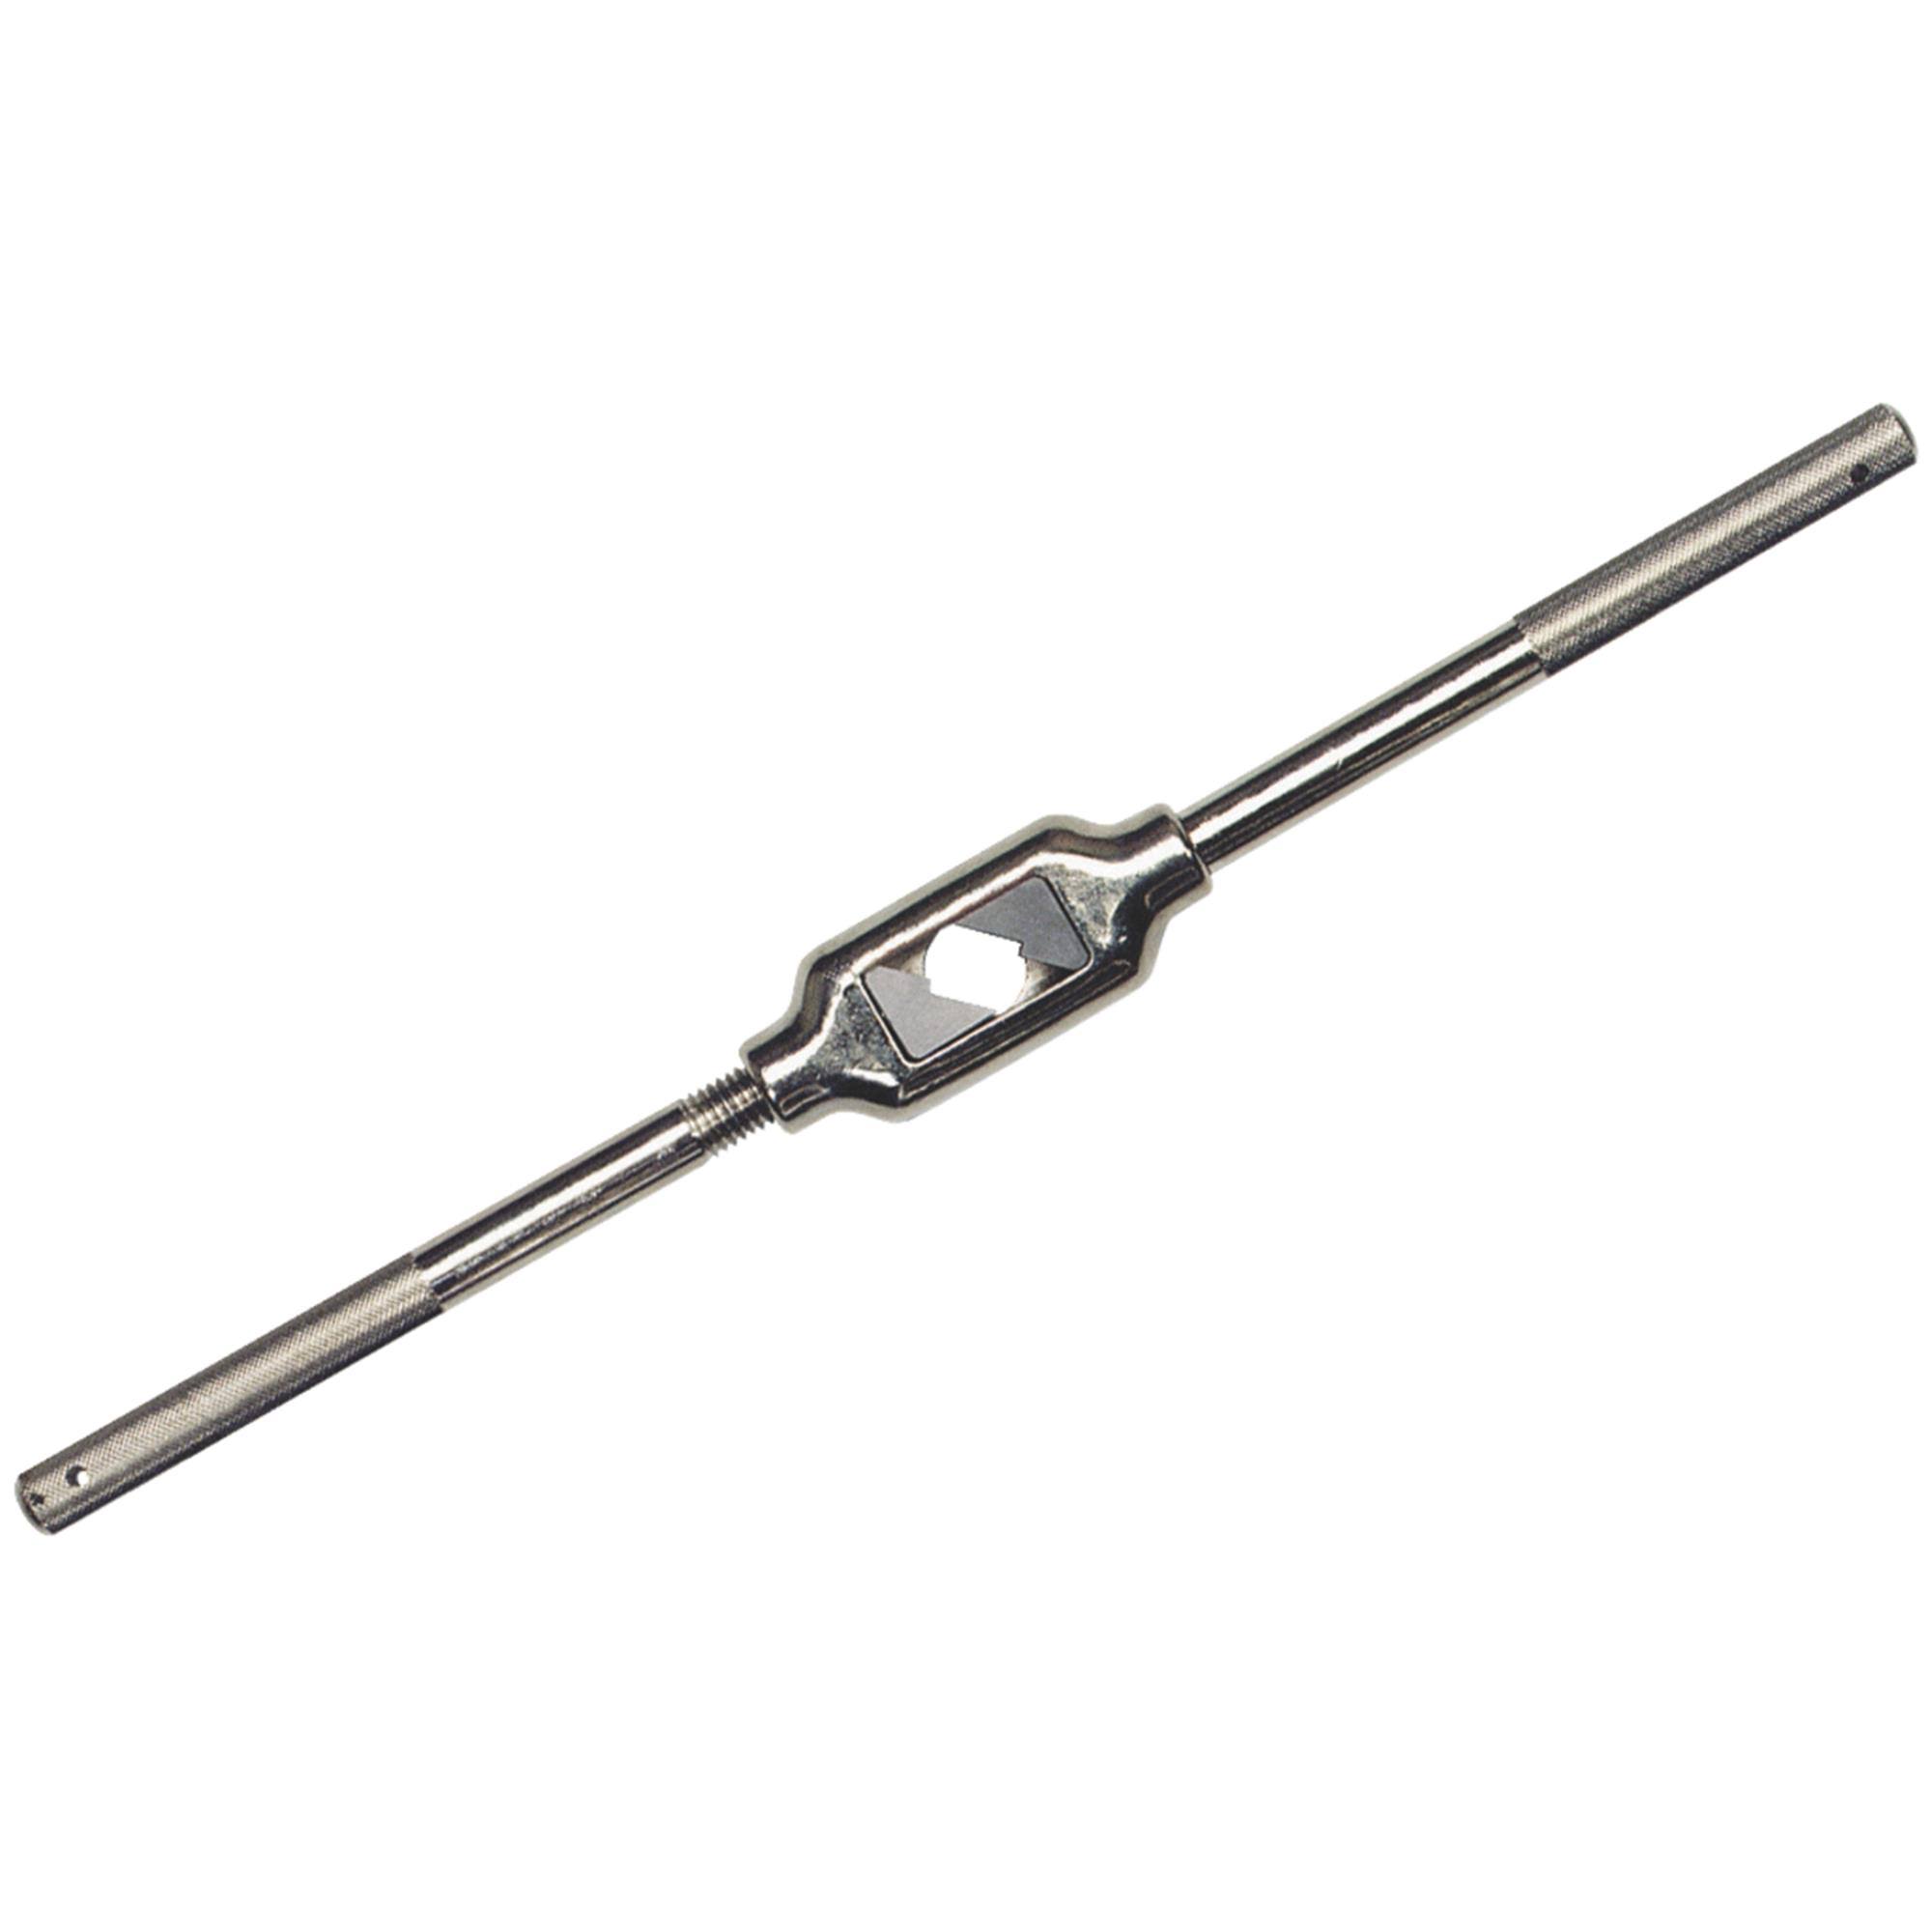 Irwin Hanson Steel Adjustable Handle Tap and Reamer Wrench - Size 0-1/2"